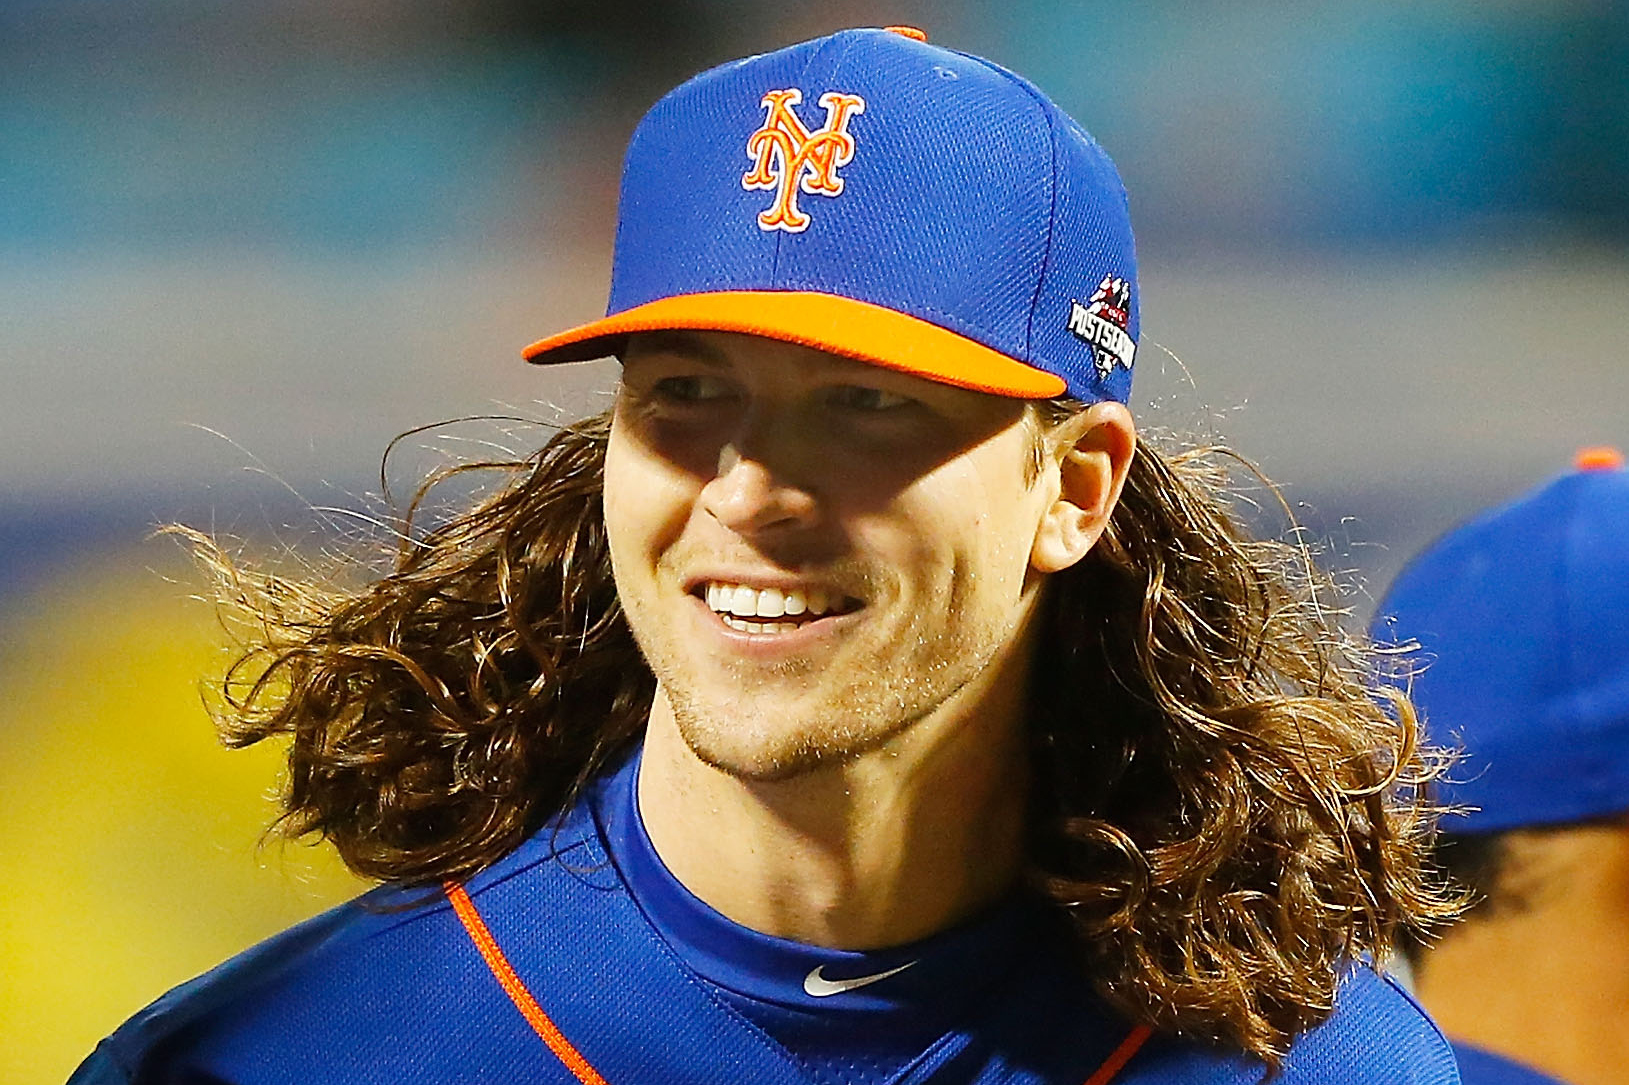 Jacob deGrom's Blue Jersey and Long Hair: A Fan Favorite Combo - wide 4